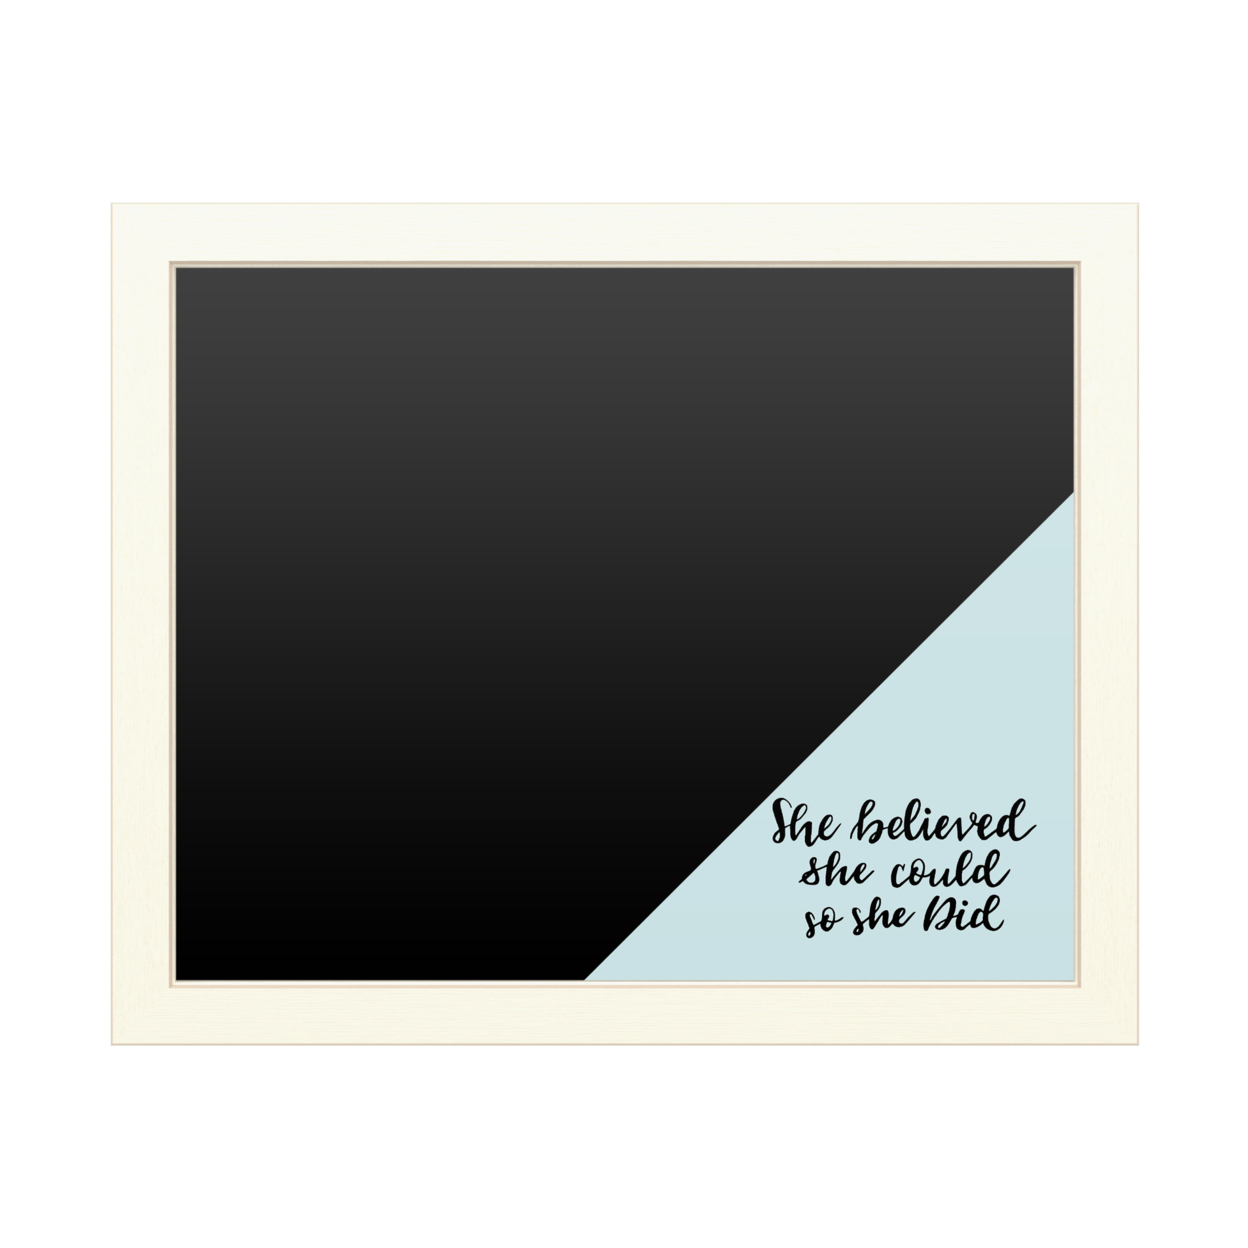 Trademark Global 16 x 20 Chalk Board with Printed Artwork - She Believed She Could Blue White Board - Ready to Hang Chalkboard